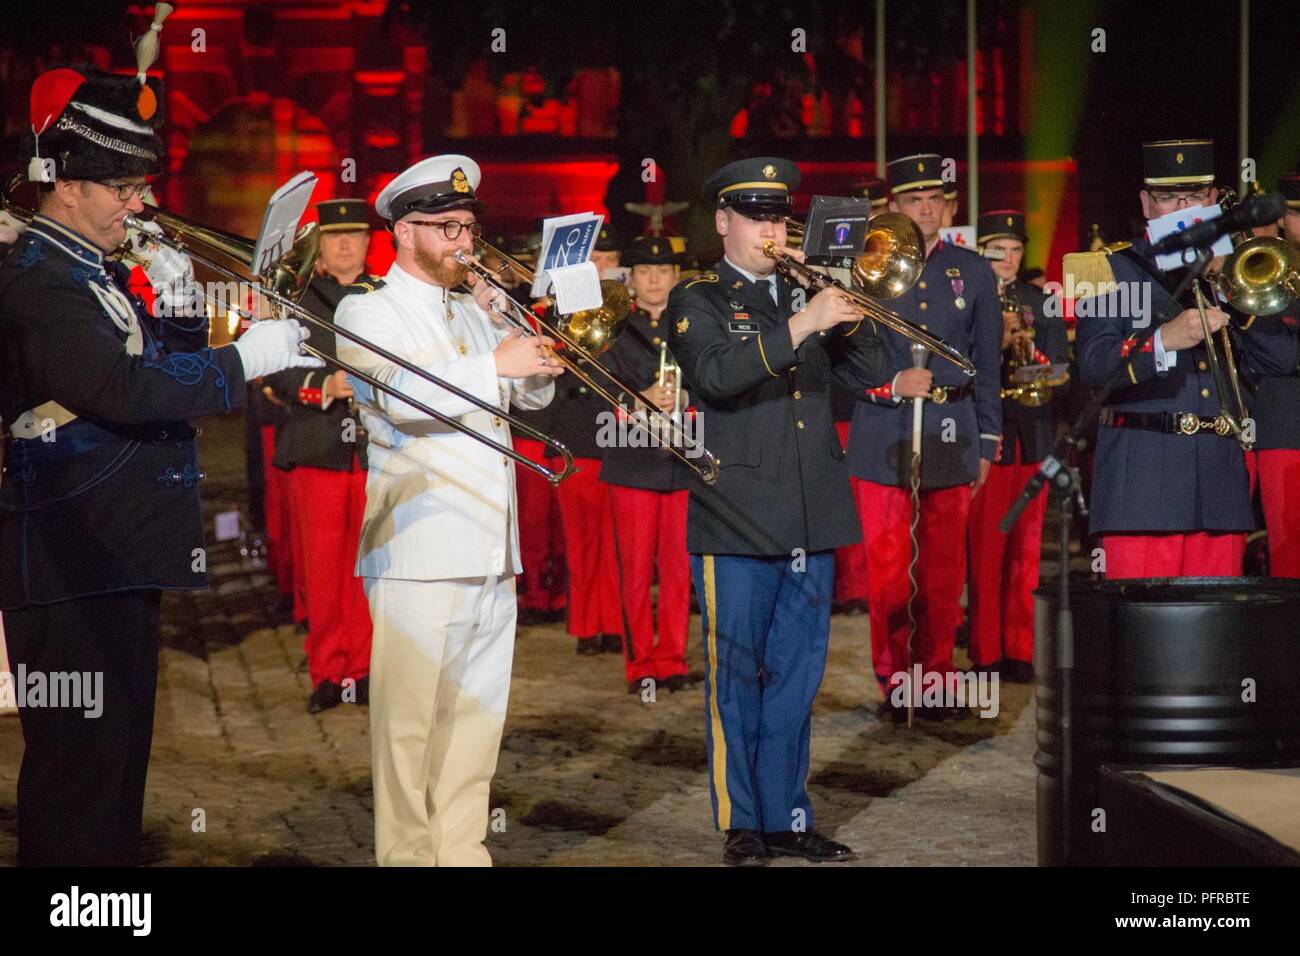 Spc Patrick Weiss, 3rd from the left, performs alongside the international trombone soloists for the Citadelle 350 anniversary military show, May 25, 2018, Lille, France.  US Army Stock Photo